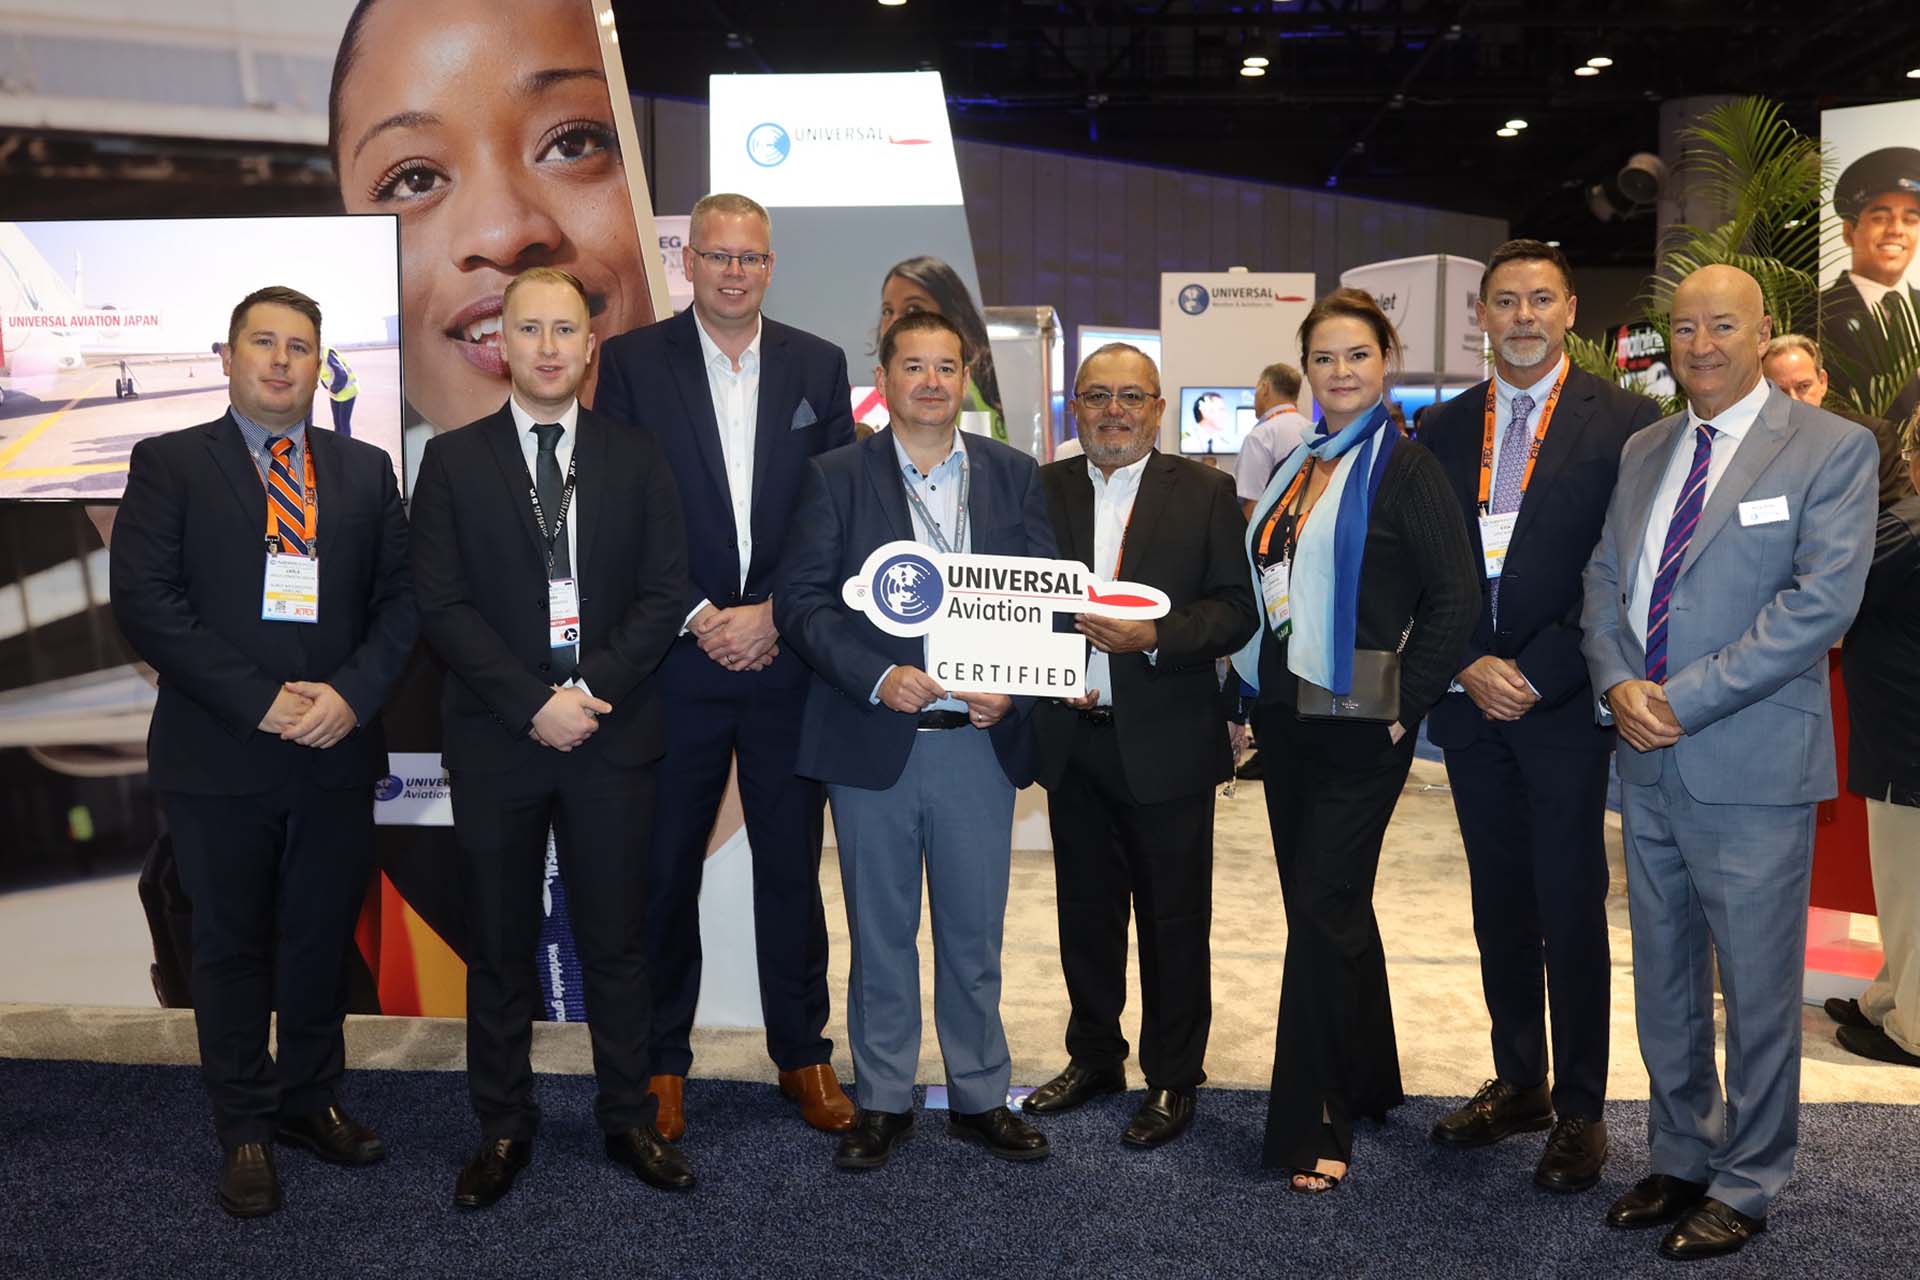 Universal Aviation, the FBO ground services division of Universal Weather and Aviation, Inc., announced six new Universal Aviation® Certified member locations as the network continues to aggressively expand globally.